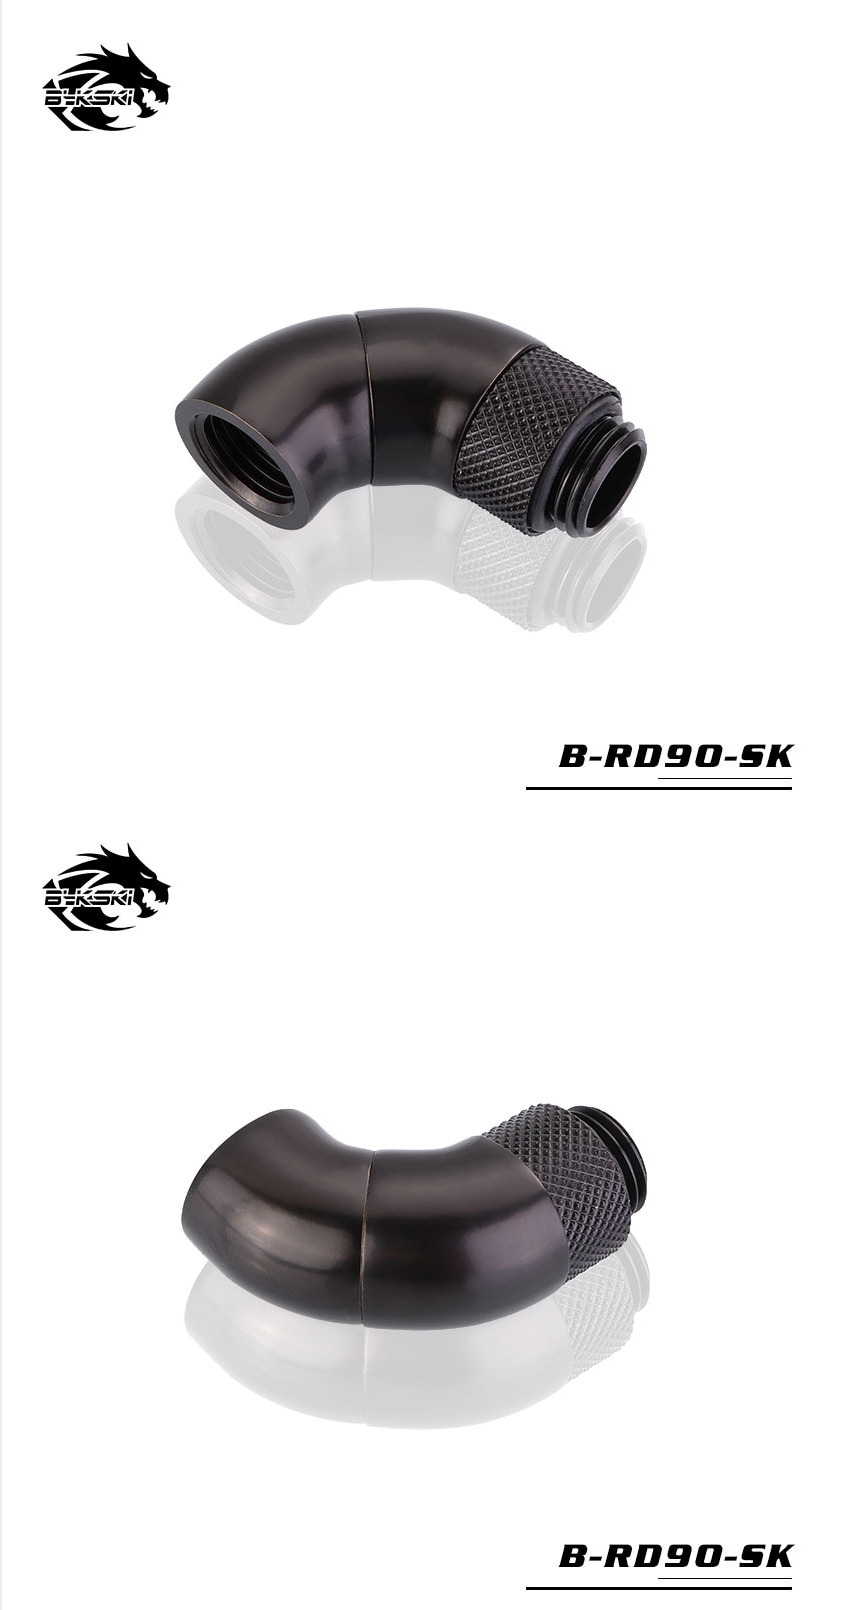 A large marketing image providing additional information about the product Bykski G1/4 90 Degree Dual Rotary Extender - Matte Black - Additional alt info not provided